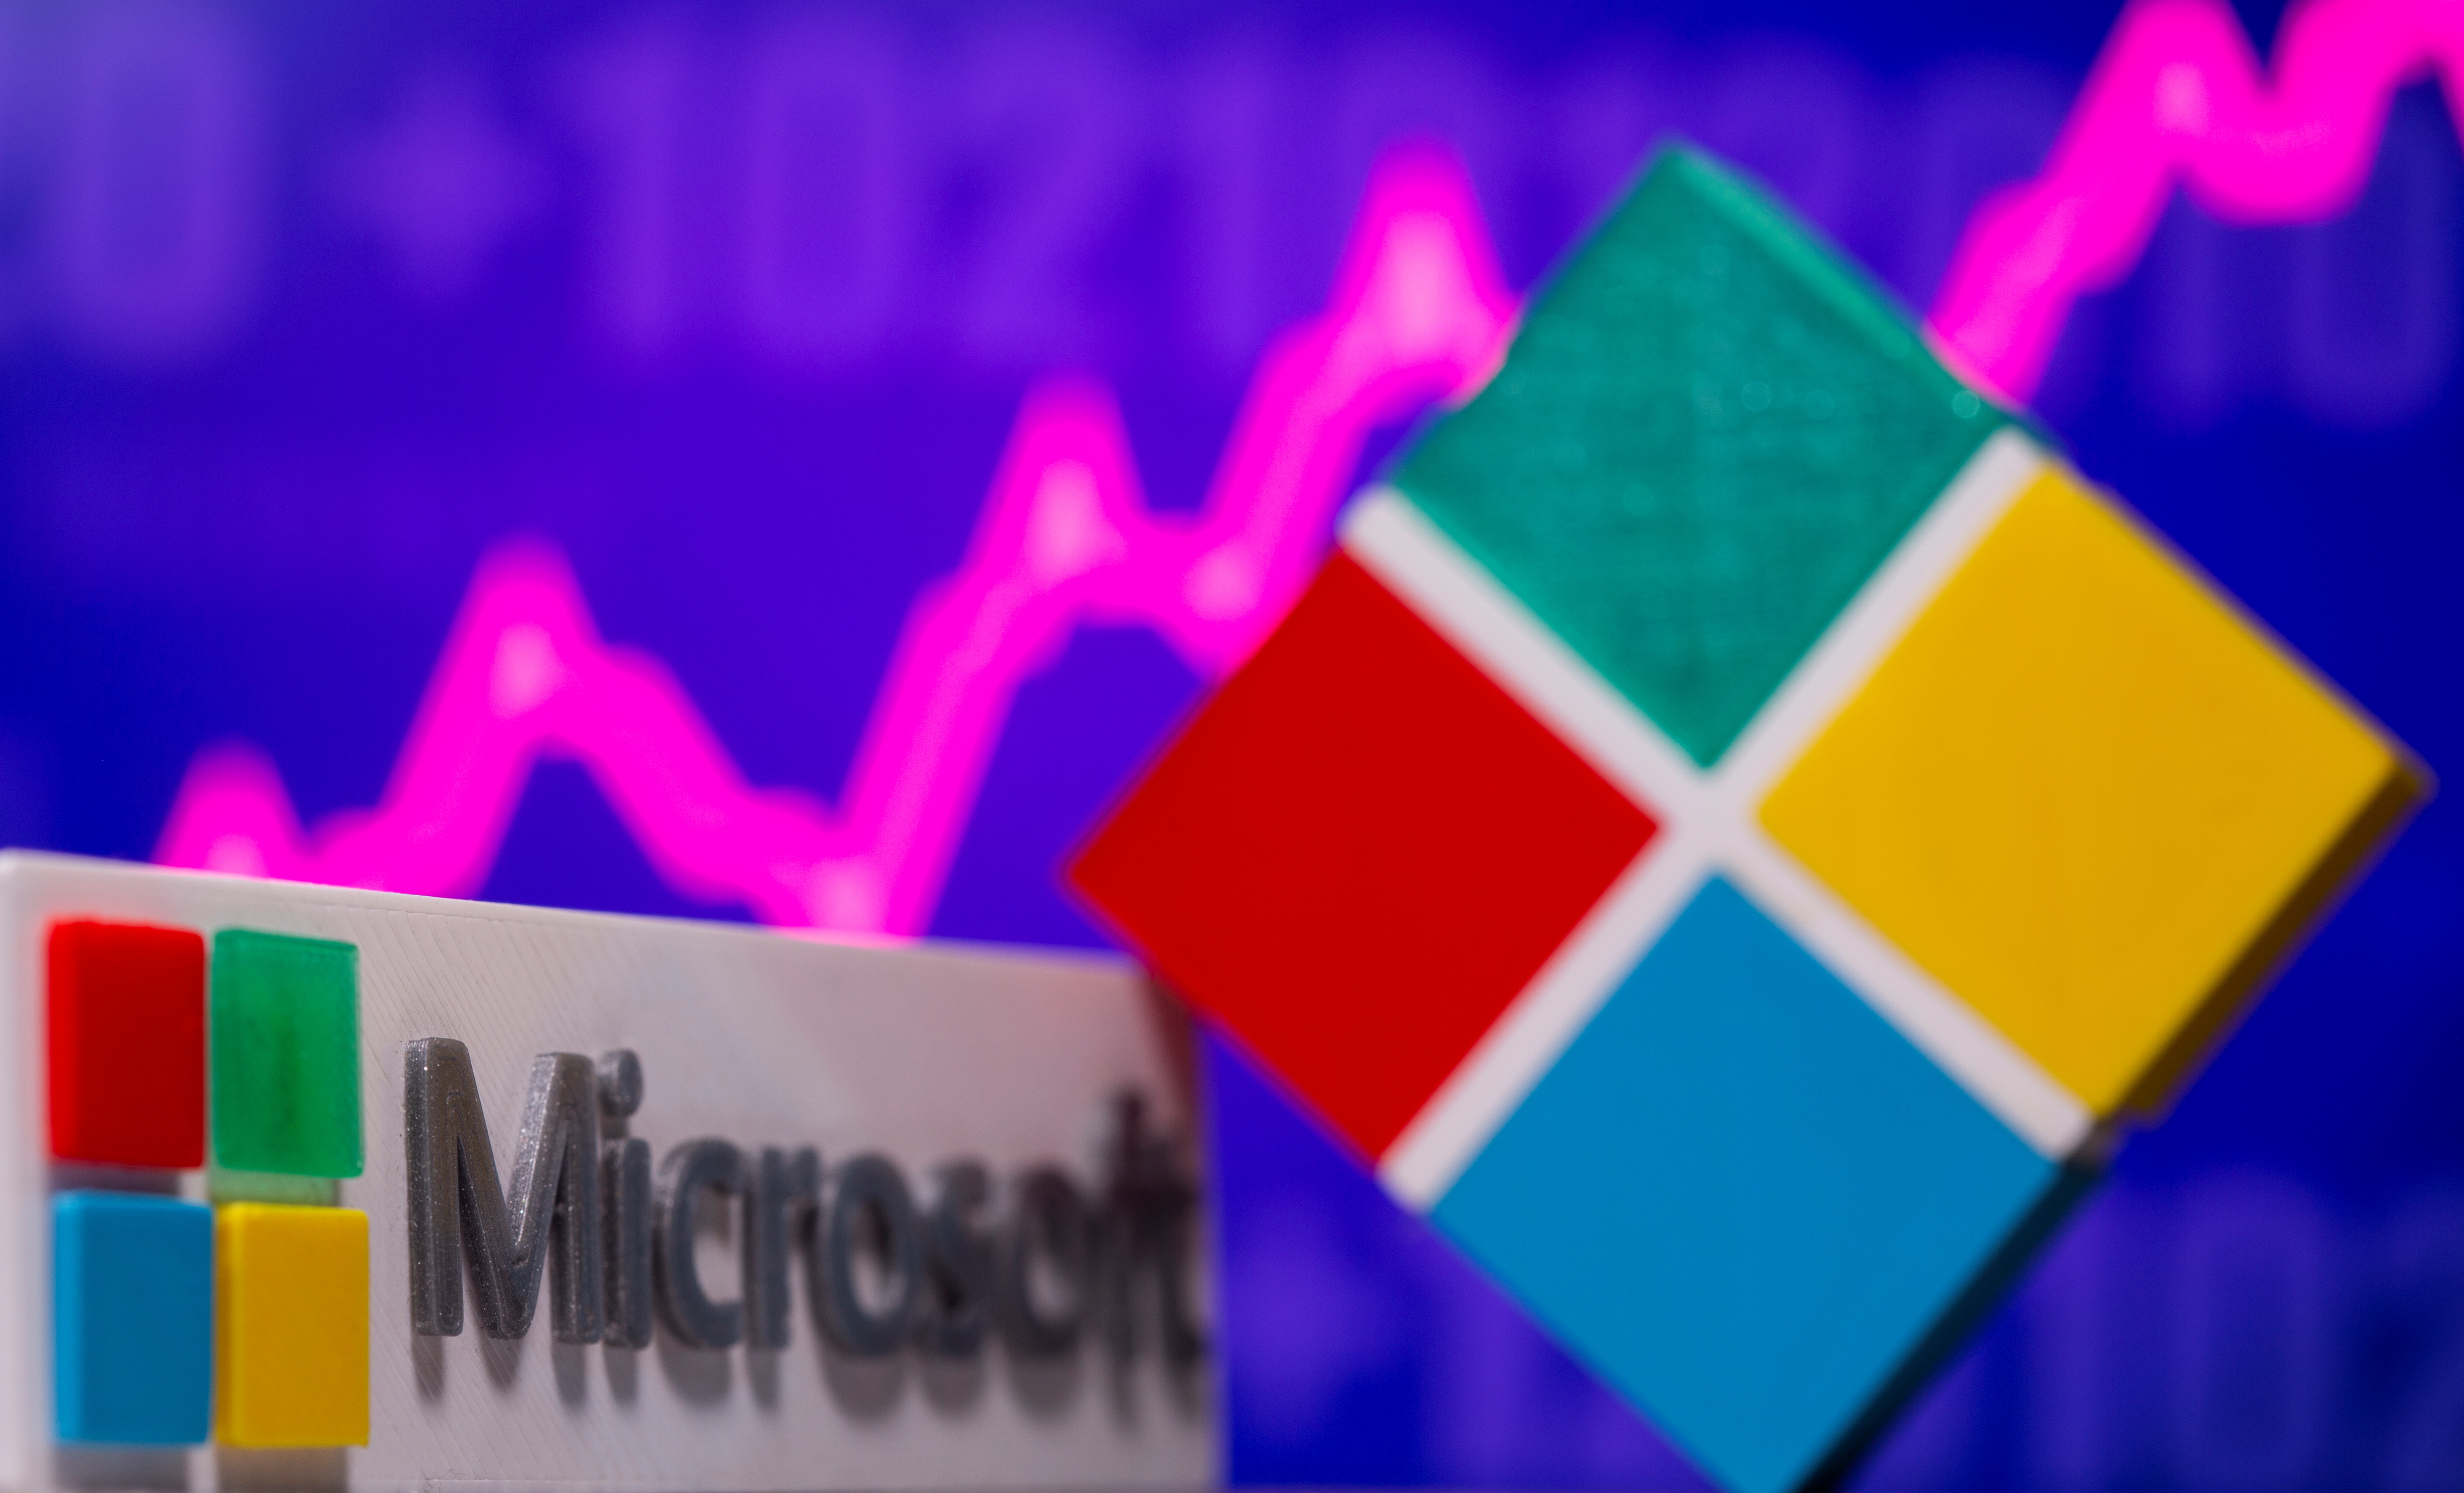 3D-printed Microsoft logos are seen in front of a stock graph in this picture illustration